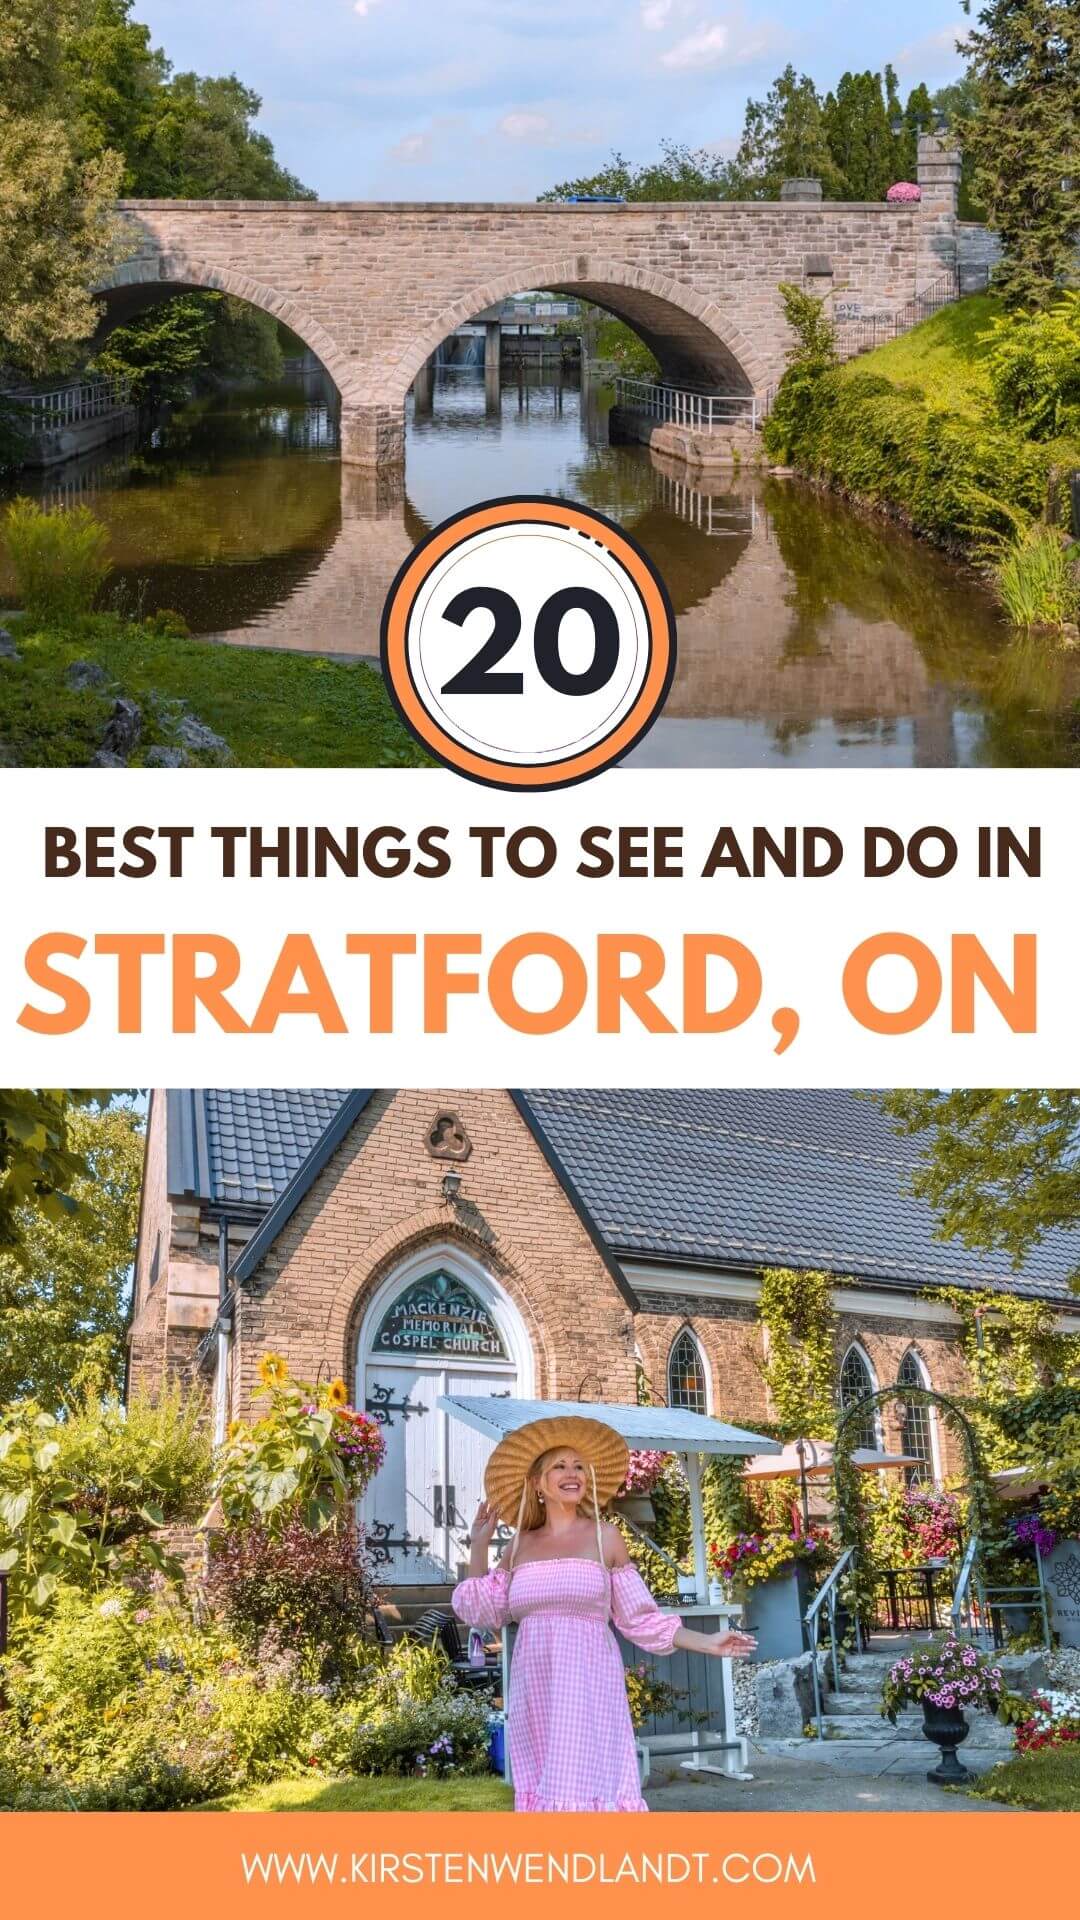 Planning a trip to Stratford, Ontario soon? This guide includes all of the best things to do in Stratford! From activities and attractions, to the top restaurants, bars, and all the things you'll want to see while there. You won't want to miss this guide that will help you plan the perfect weekend getaway to Stratford. Click for the full list.